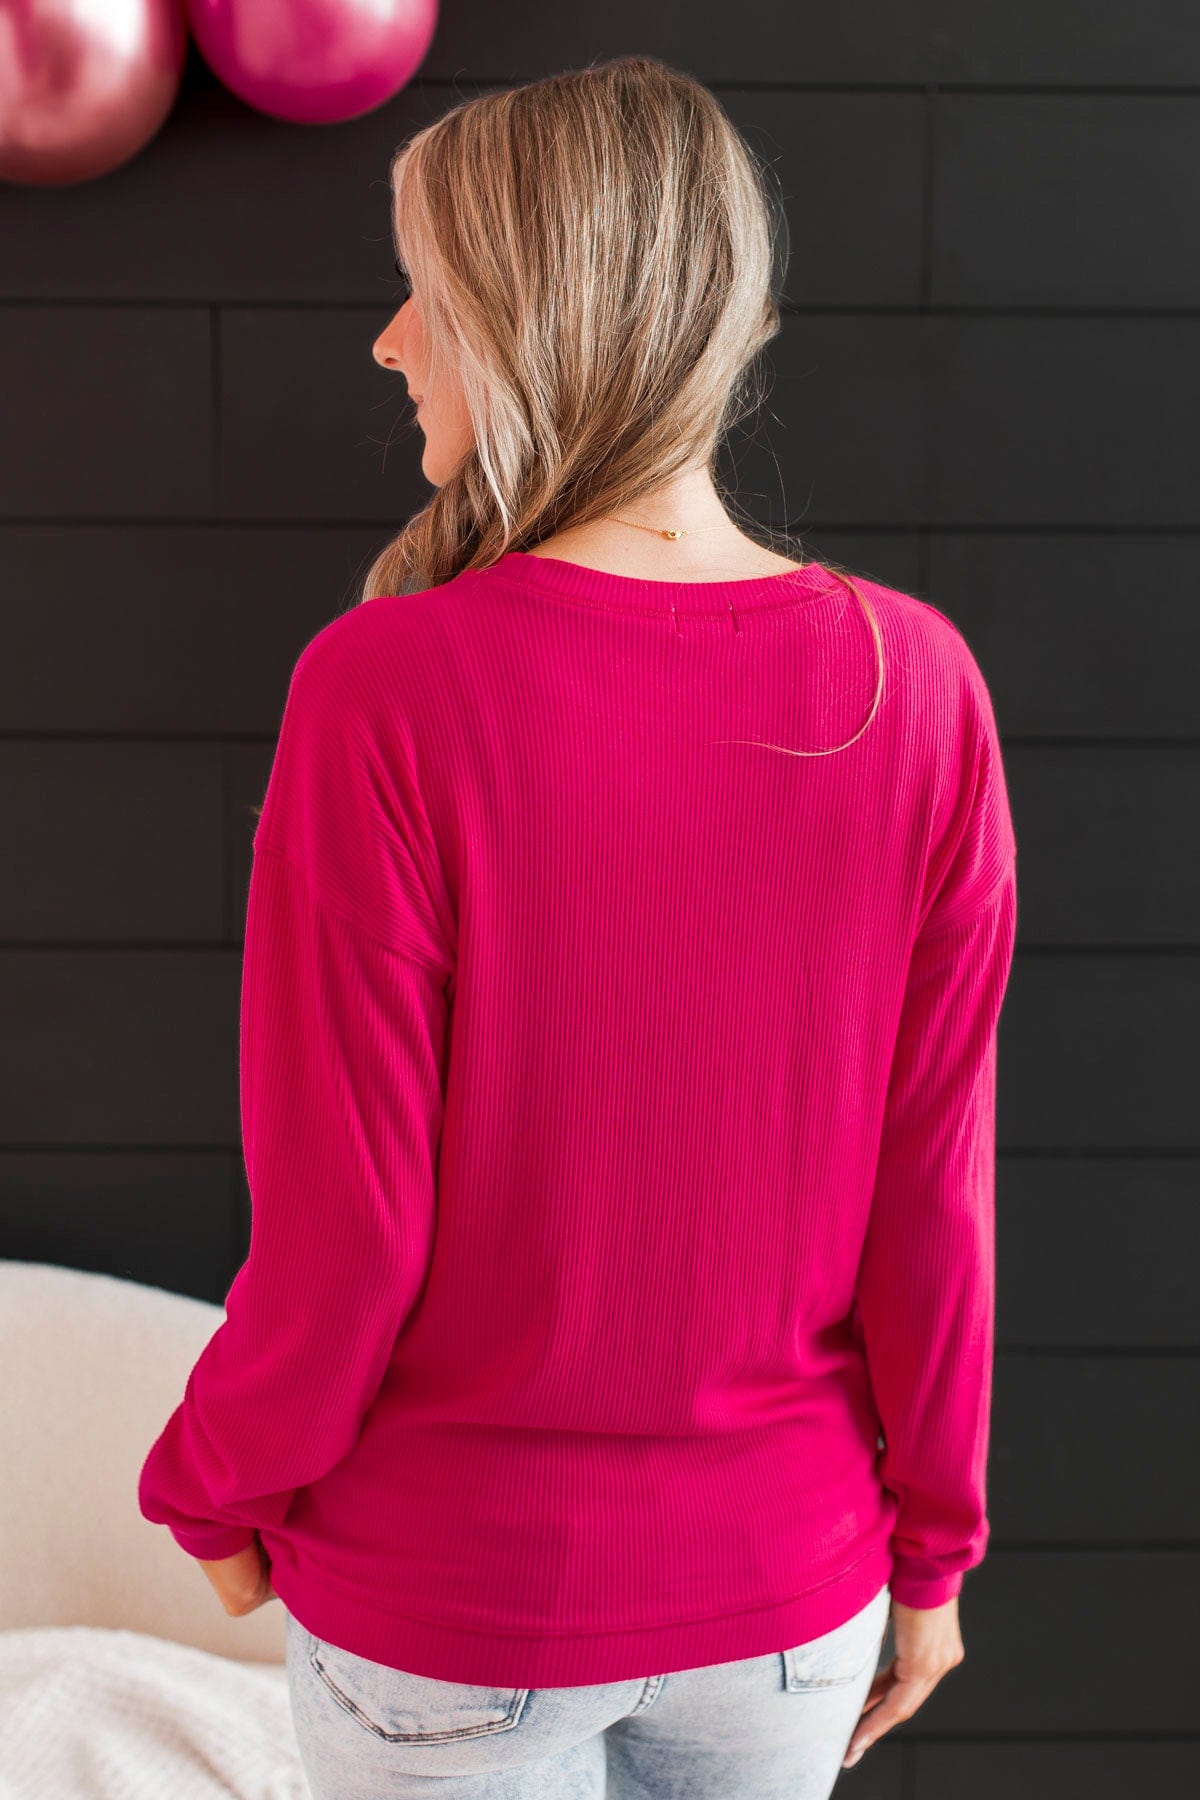 Express It All Knit Pullover Top- Hot Pink